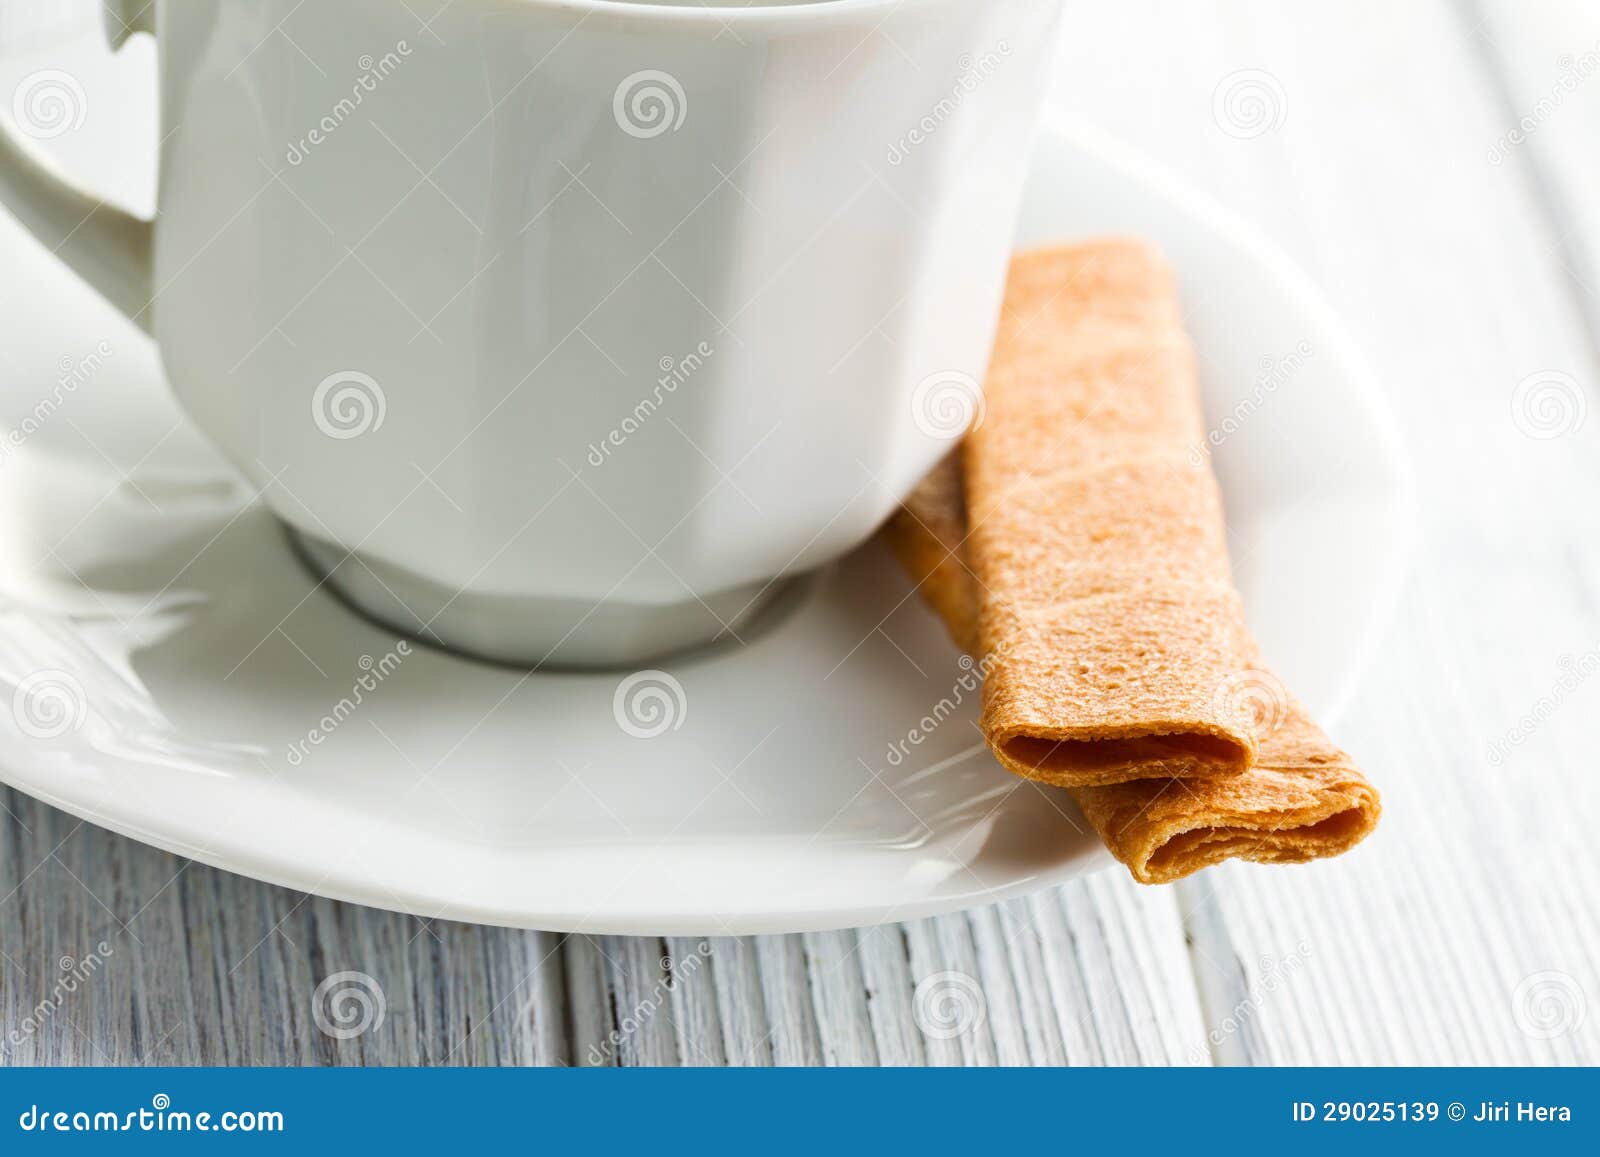 Crepes dentelle stock image. Image of morning, nutrition - 29025139